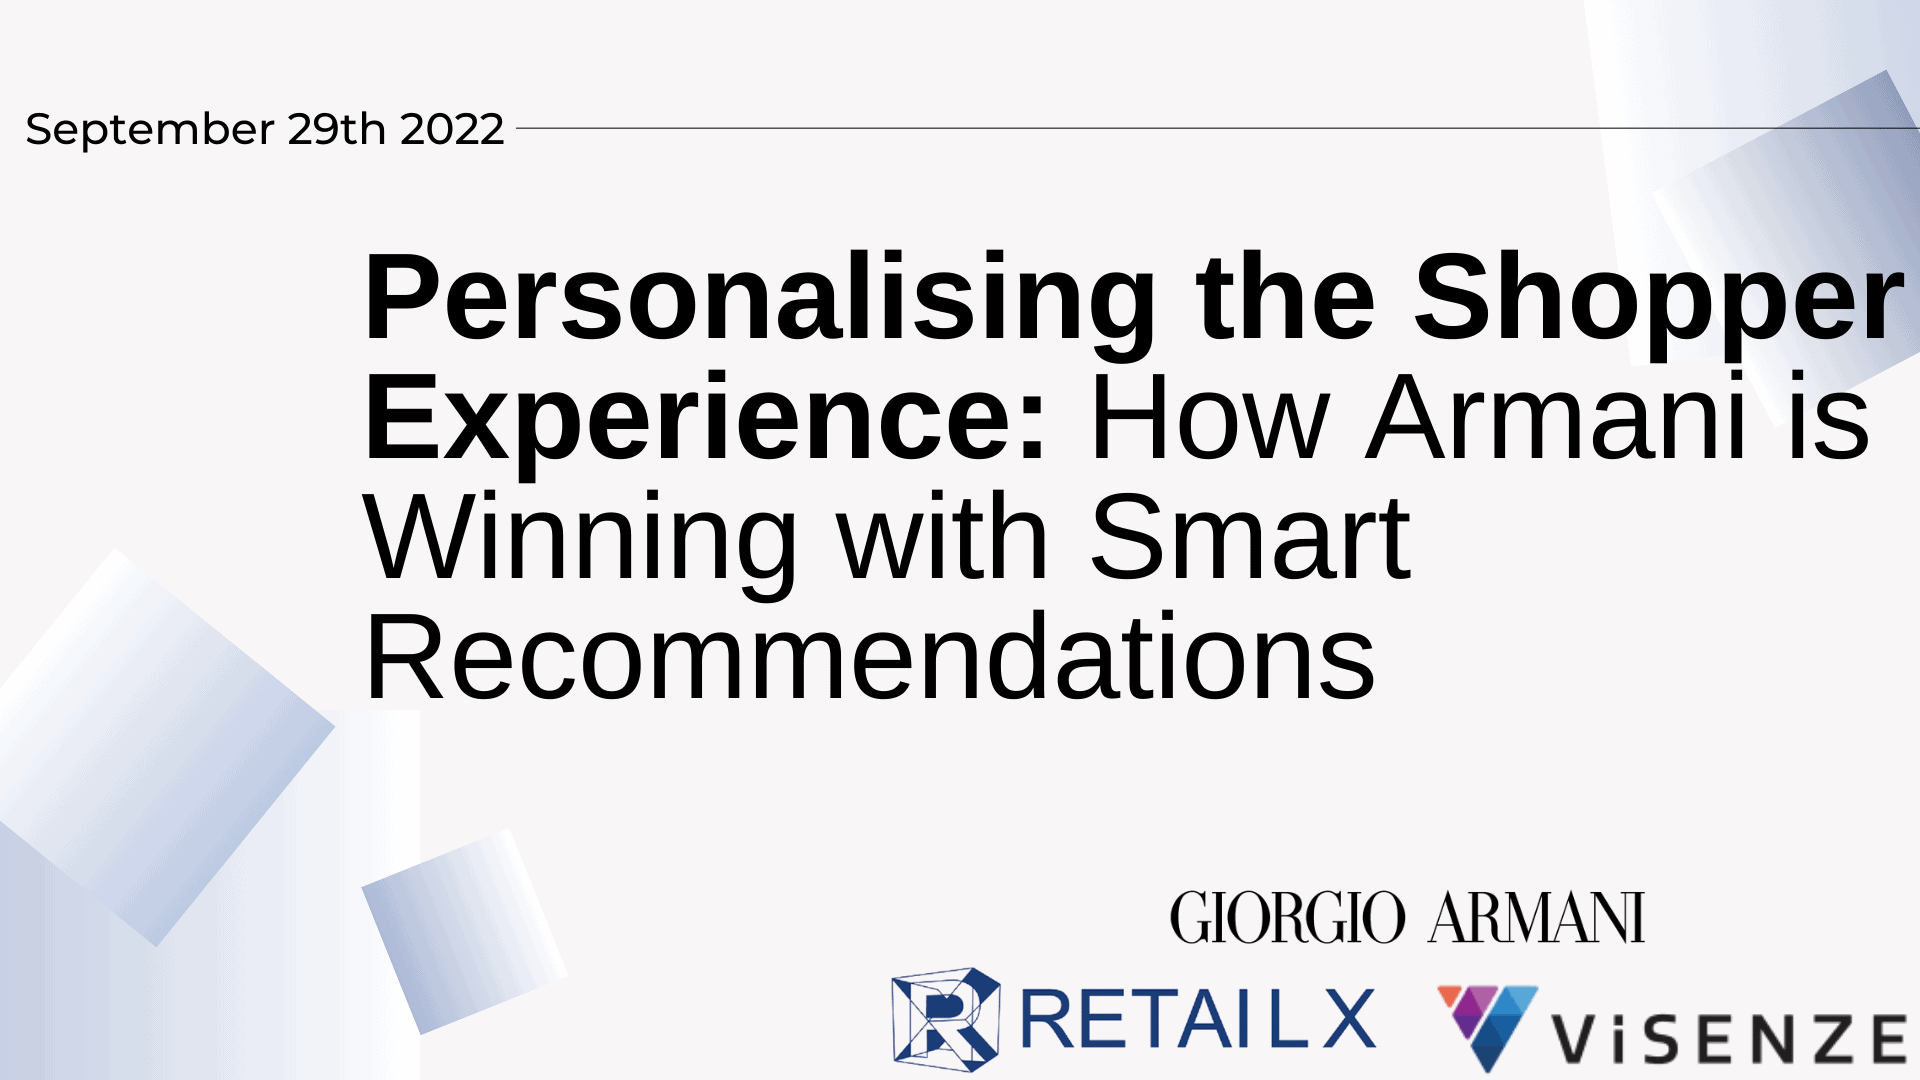 Personalising the Shopper Experience: How Armani is Winning with Smart Recommendations